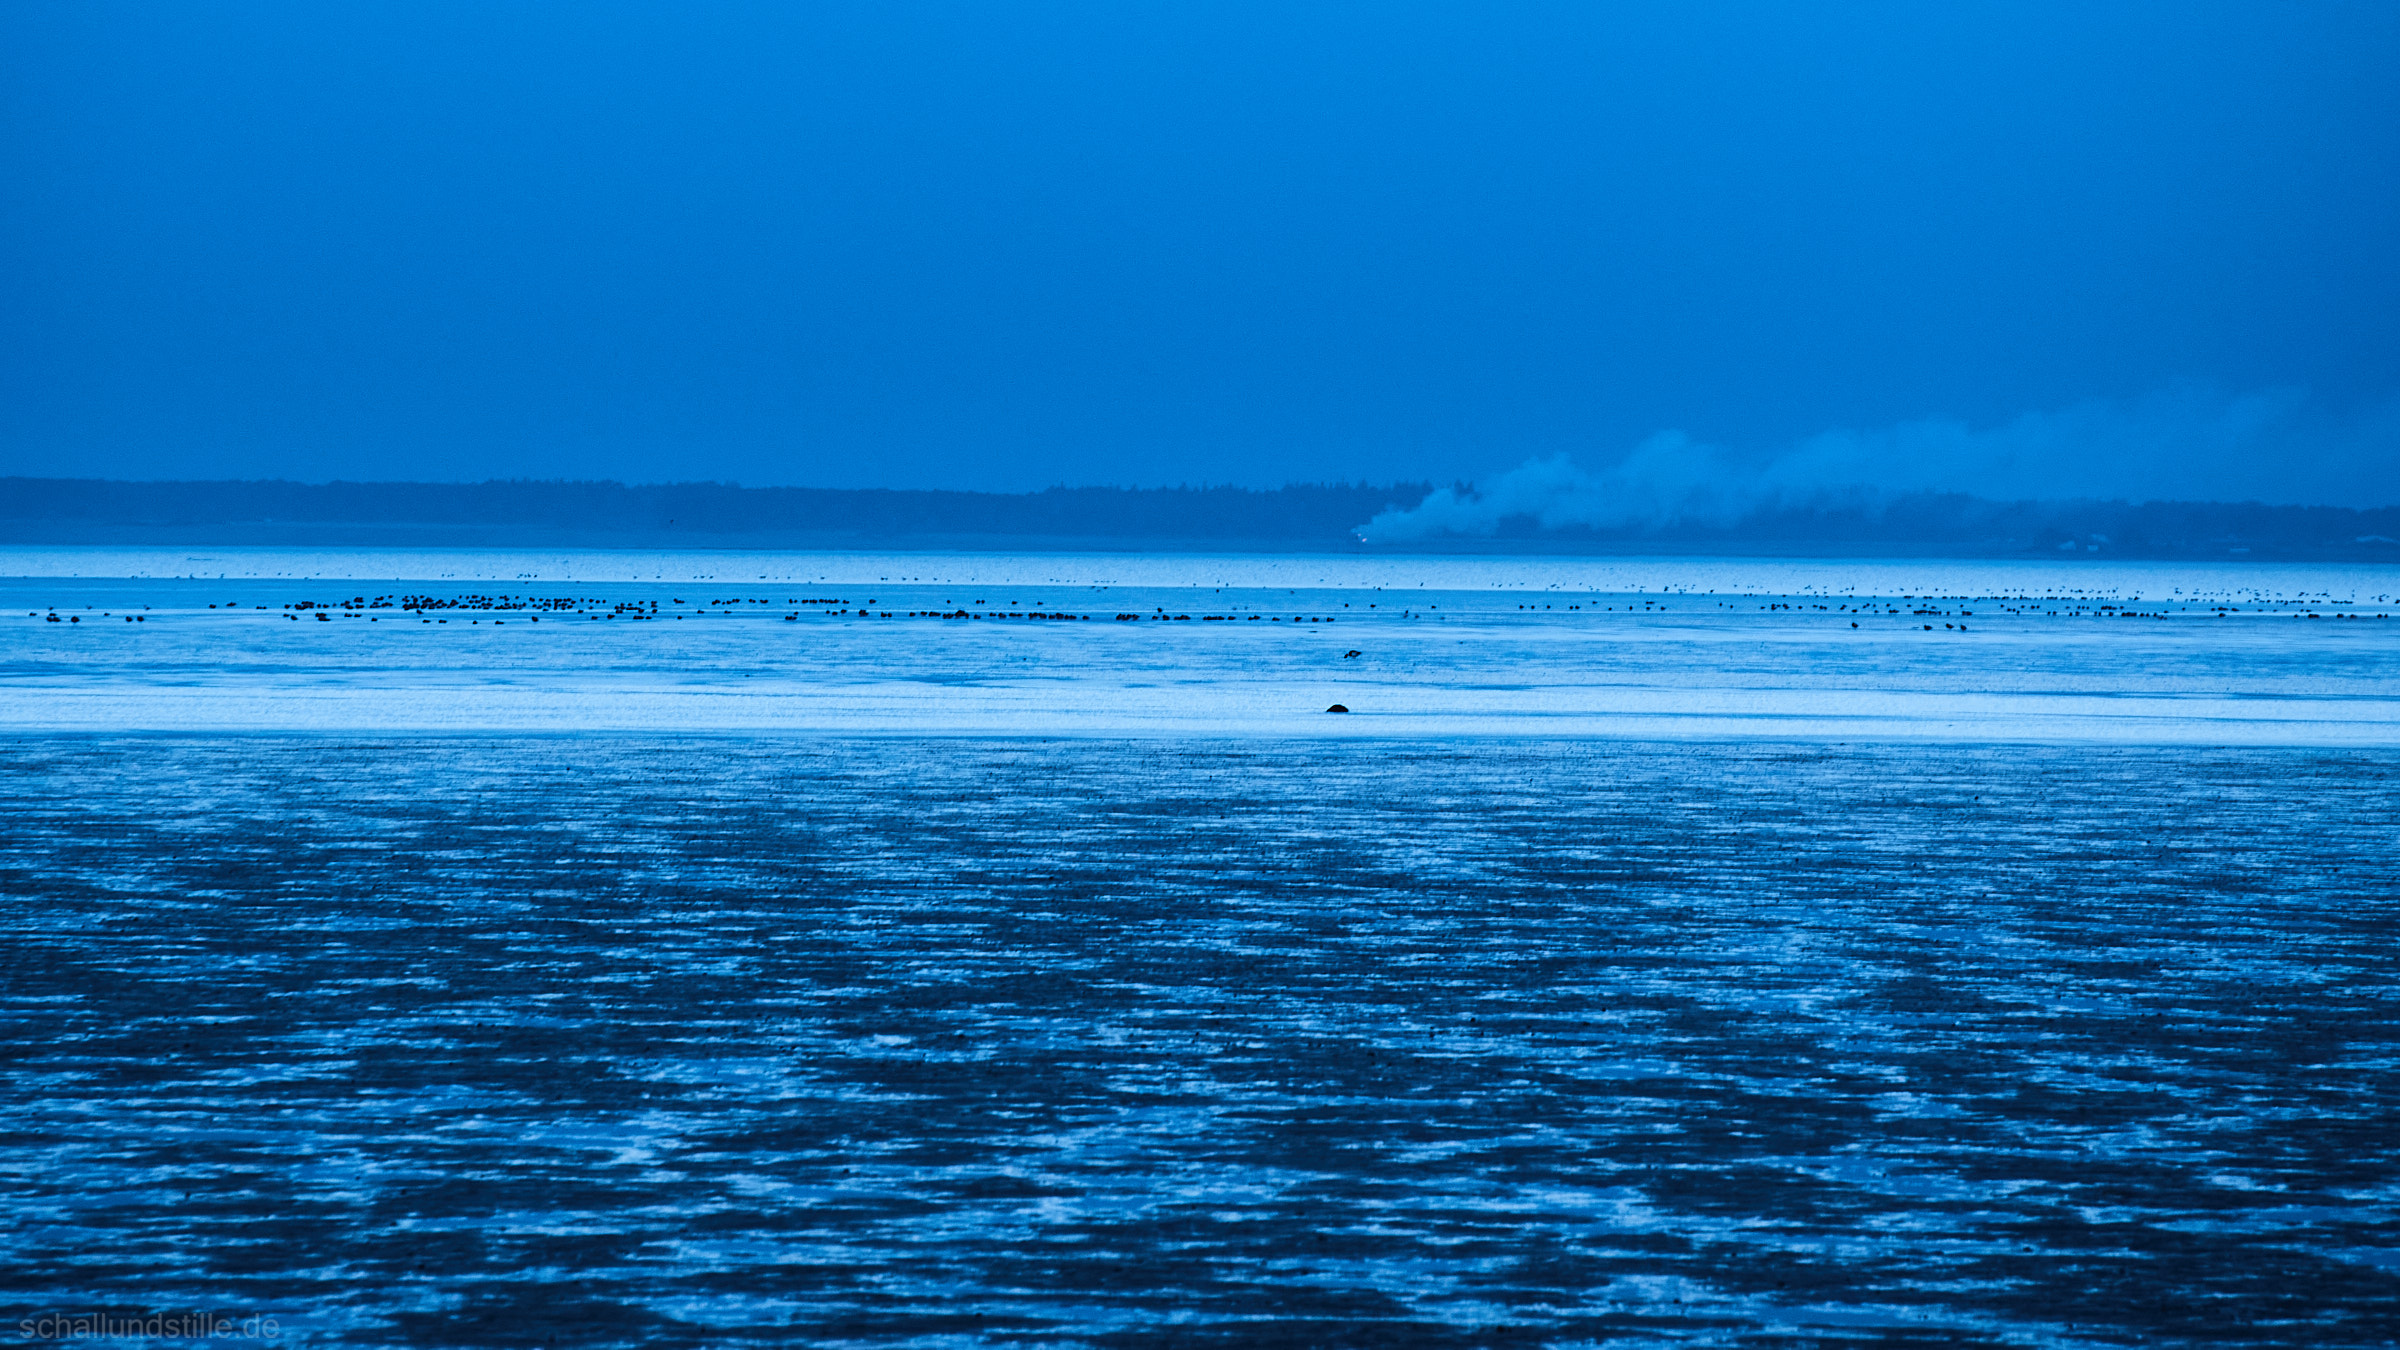 the wadden sea at ebbtide at dawn, some seabirds and the island of amrum in the distance